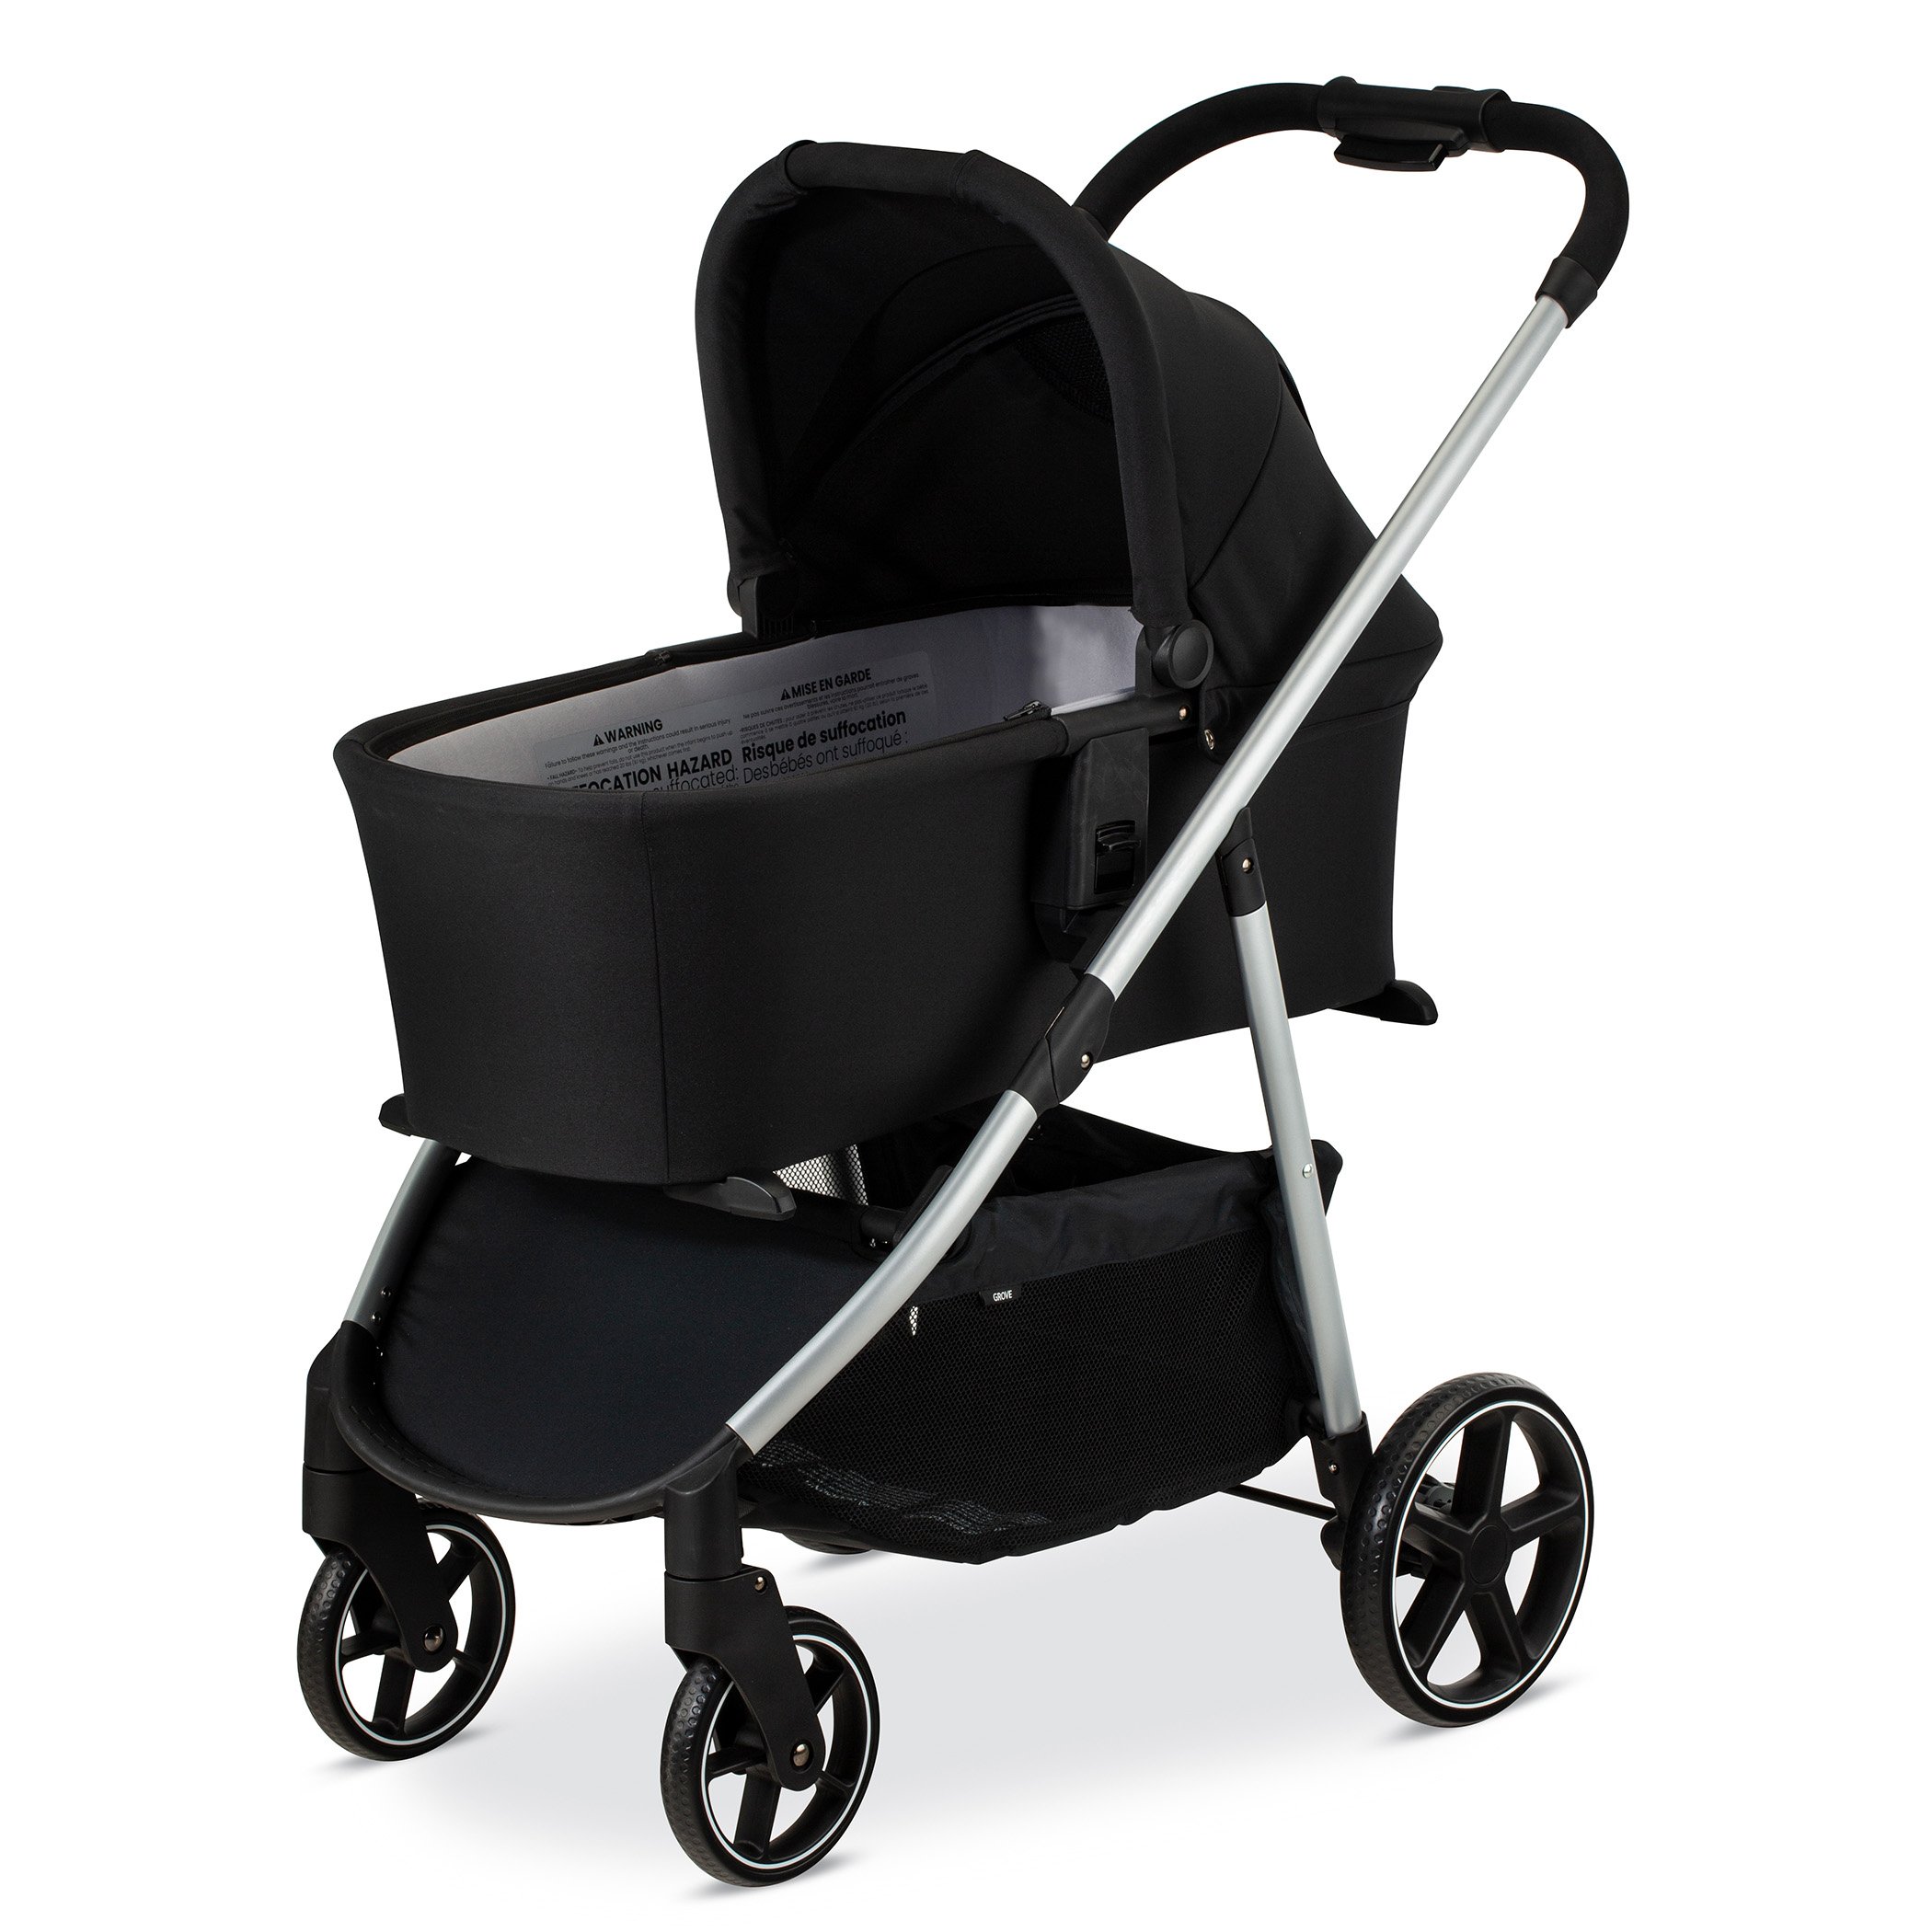 Grover Stroller with Bassinet open and attached (Copy)